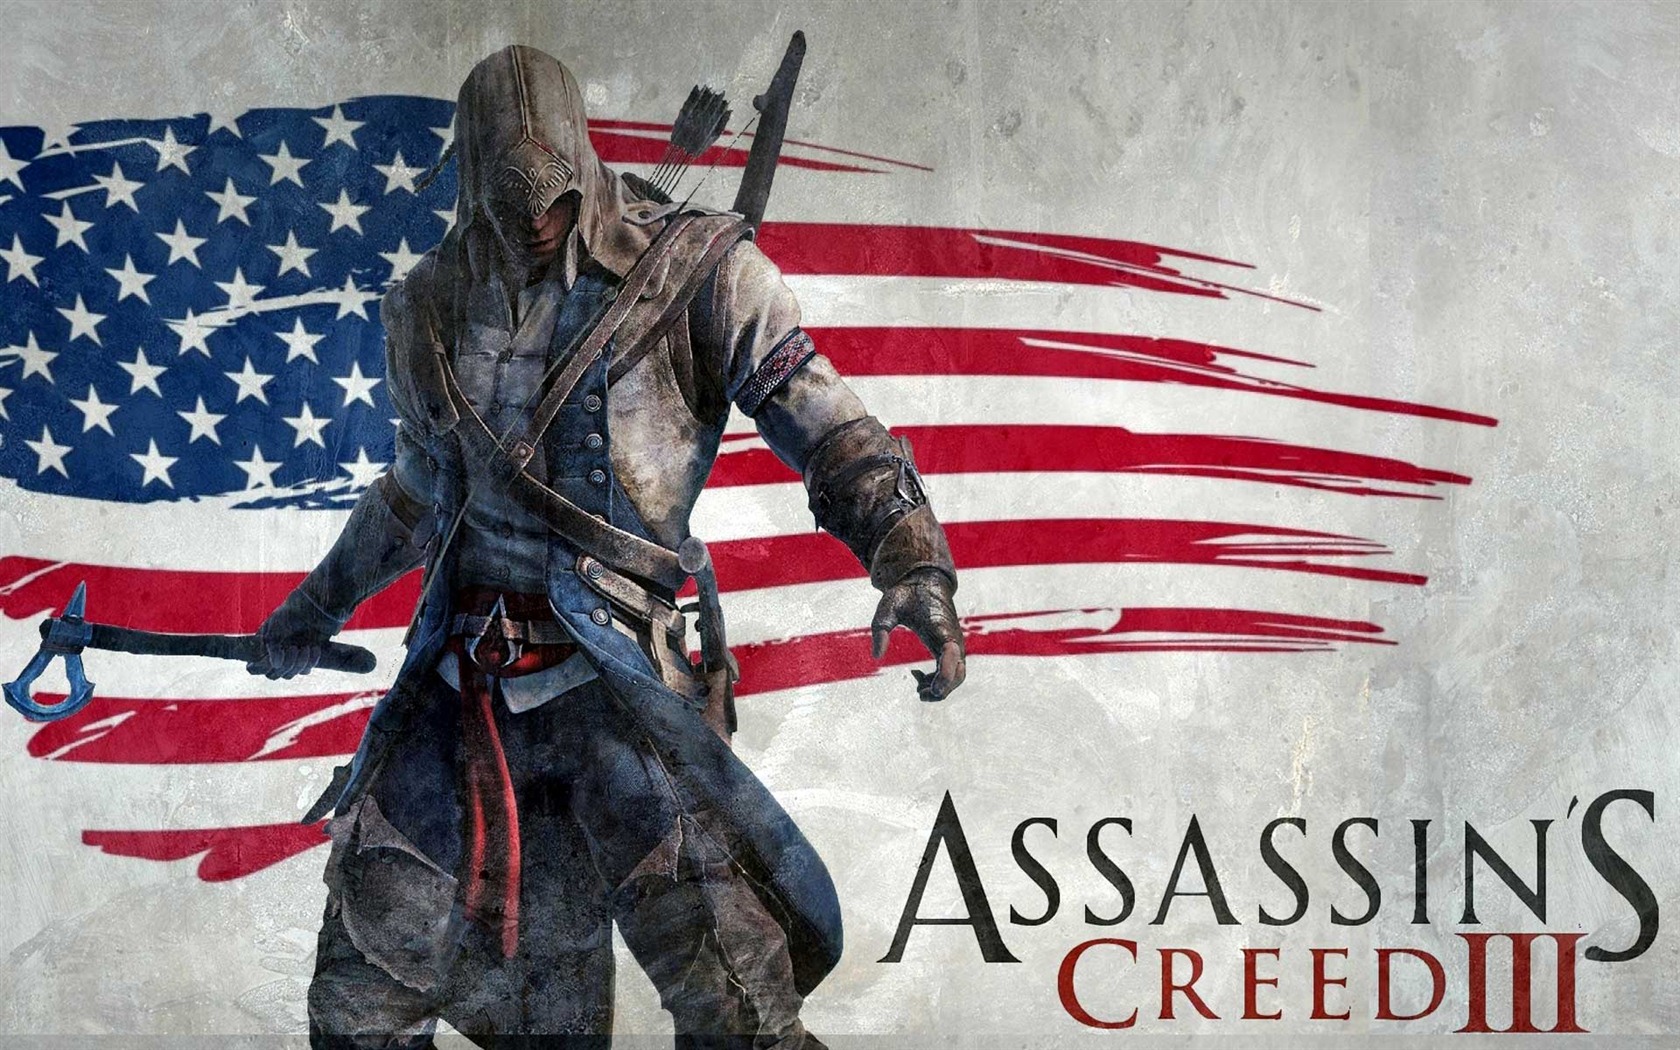 Assassin's Creed 3 HD wallpapers #12 - 1680x1050